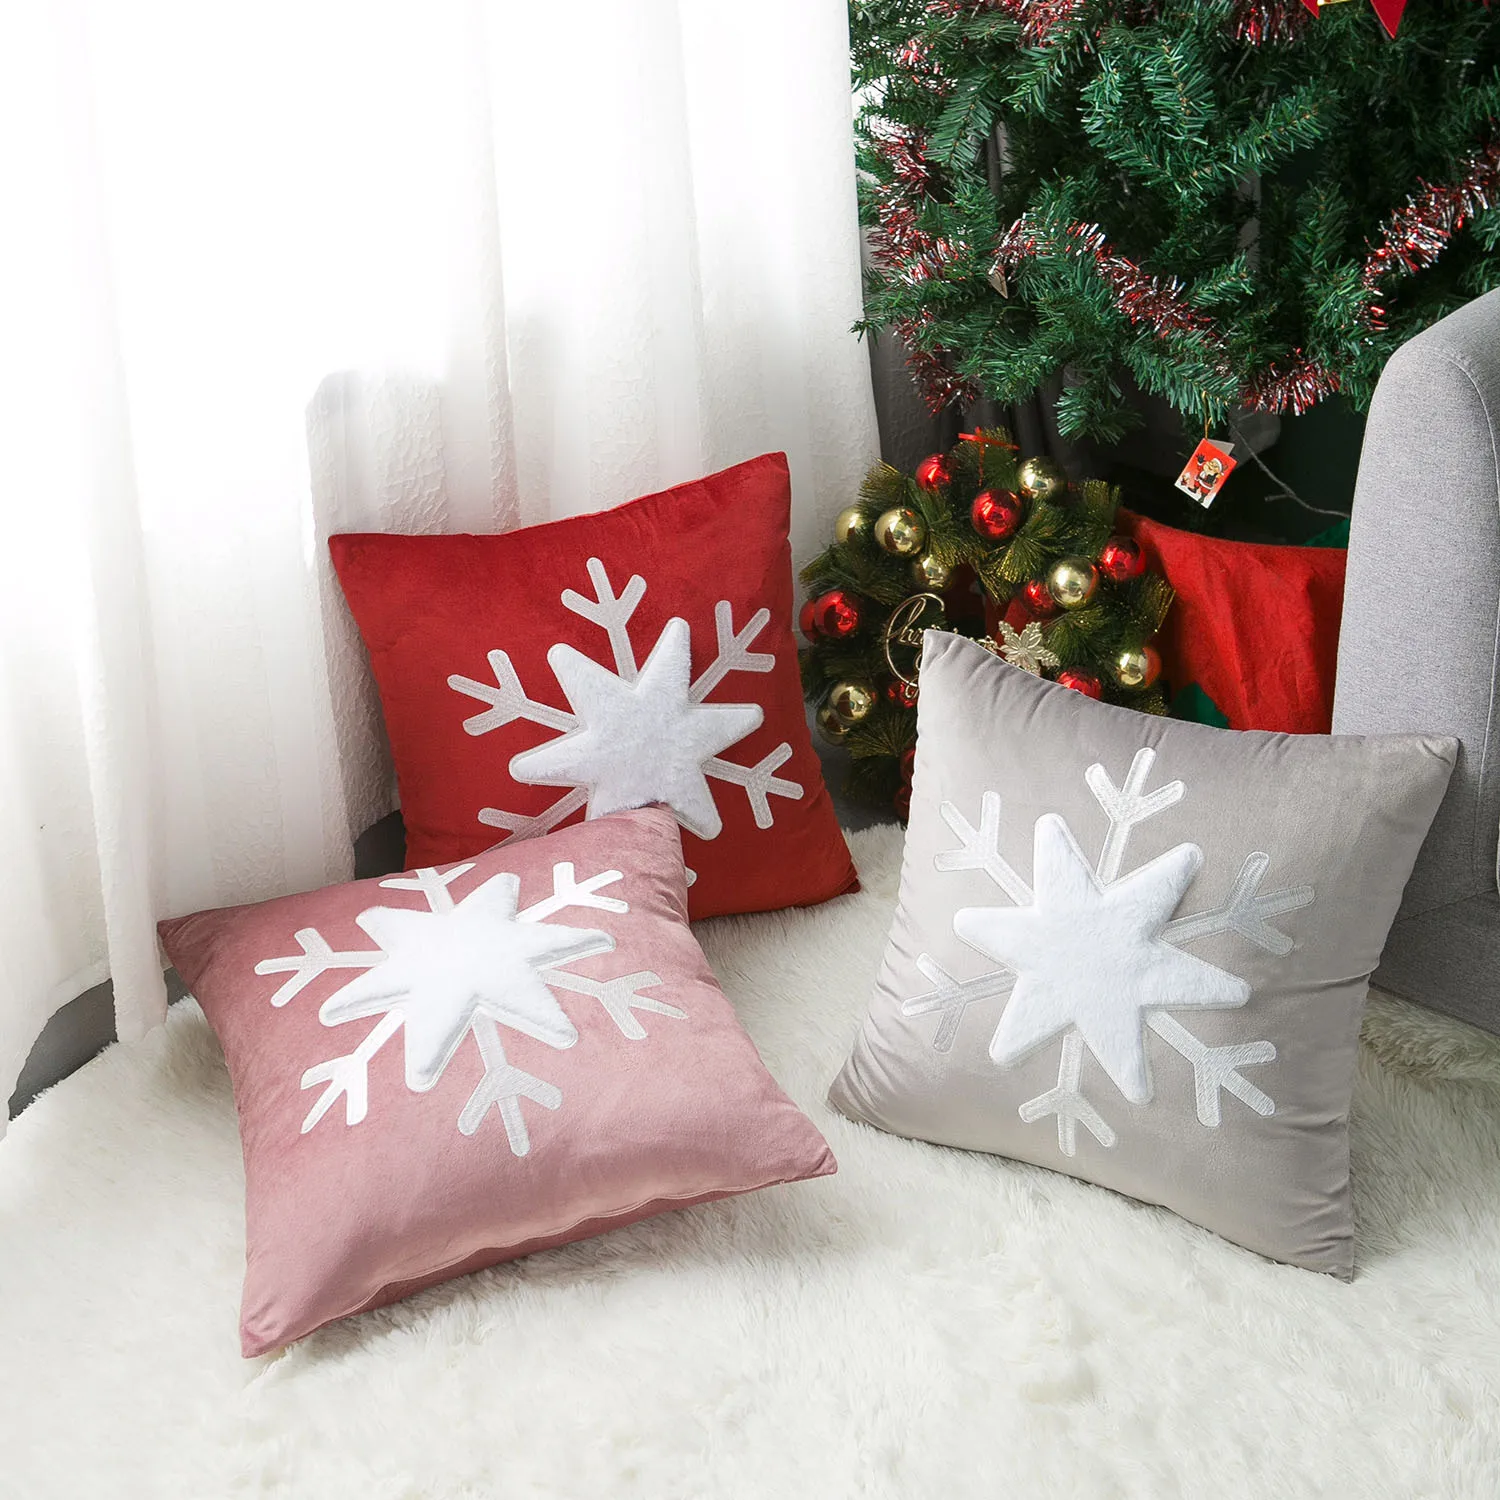 https://ae01.alicdn.com/kf/Hb8755aa73bfe4e449aea7af8cf92b0b0b/Home-Decorative-Velvet-Pillow-Cover-Embroidered-Red-Pillowcase-Patch-Pillow-Snowflake-Sofa-Cushion-Christmas-Pillow-Covers.jpg